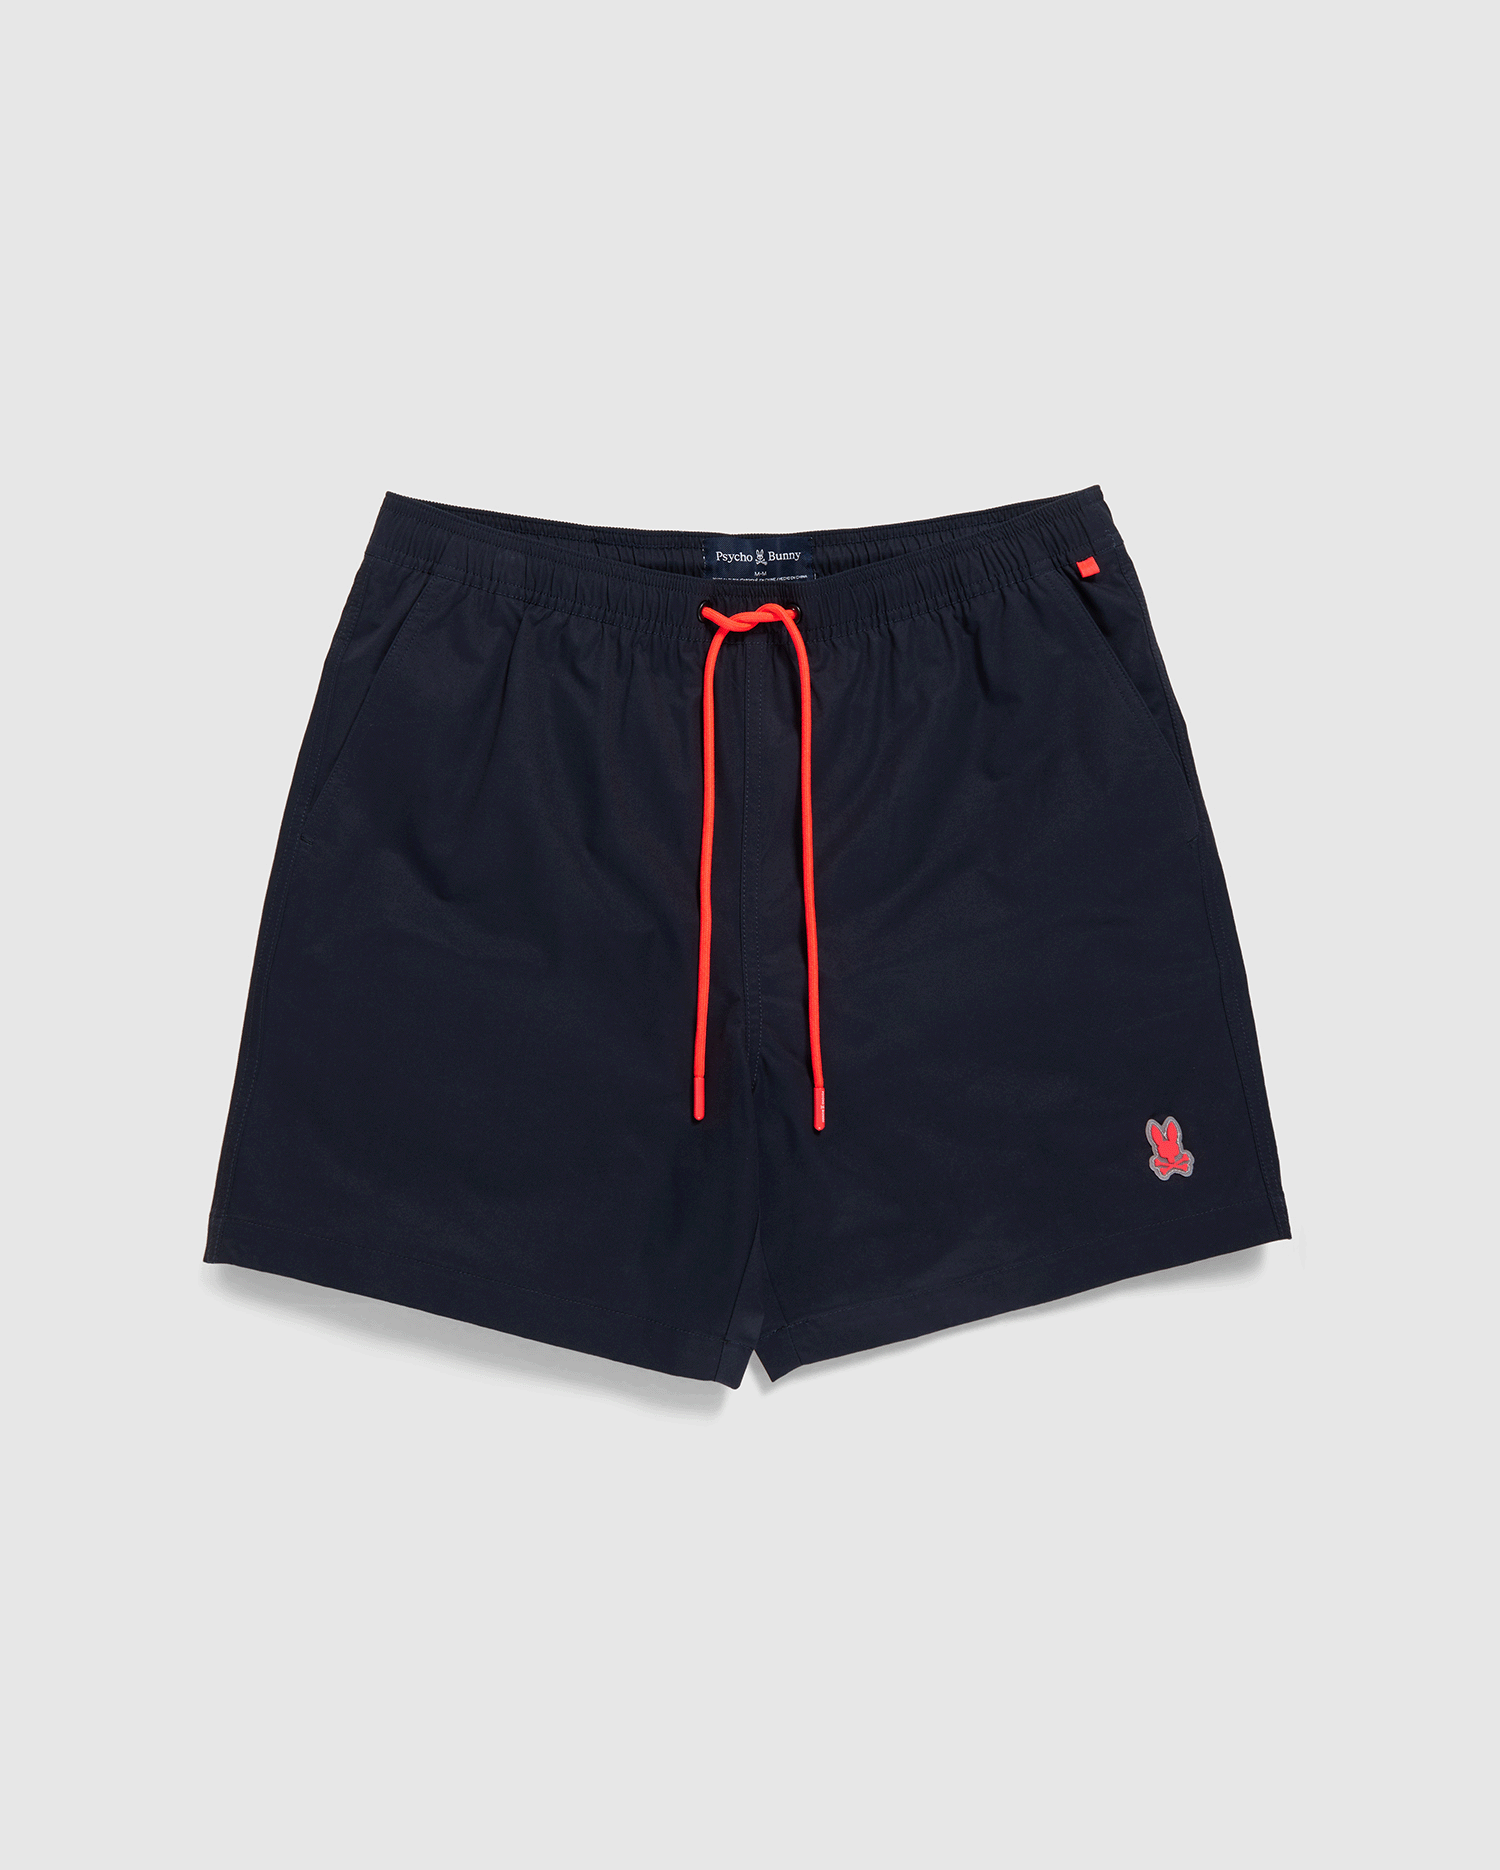 Navy blue Psycho Bunny swim trunks with a red drawstring and a small red emblem on the left leg, displayed against a white background.